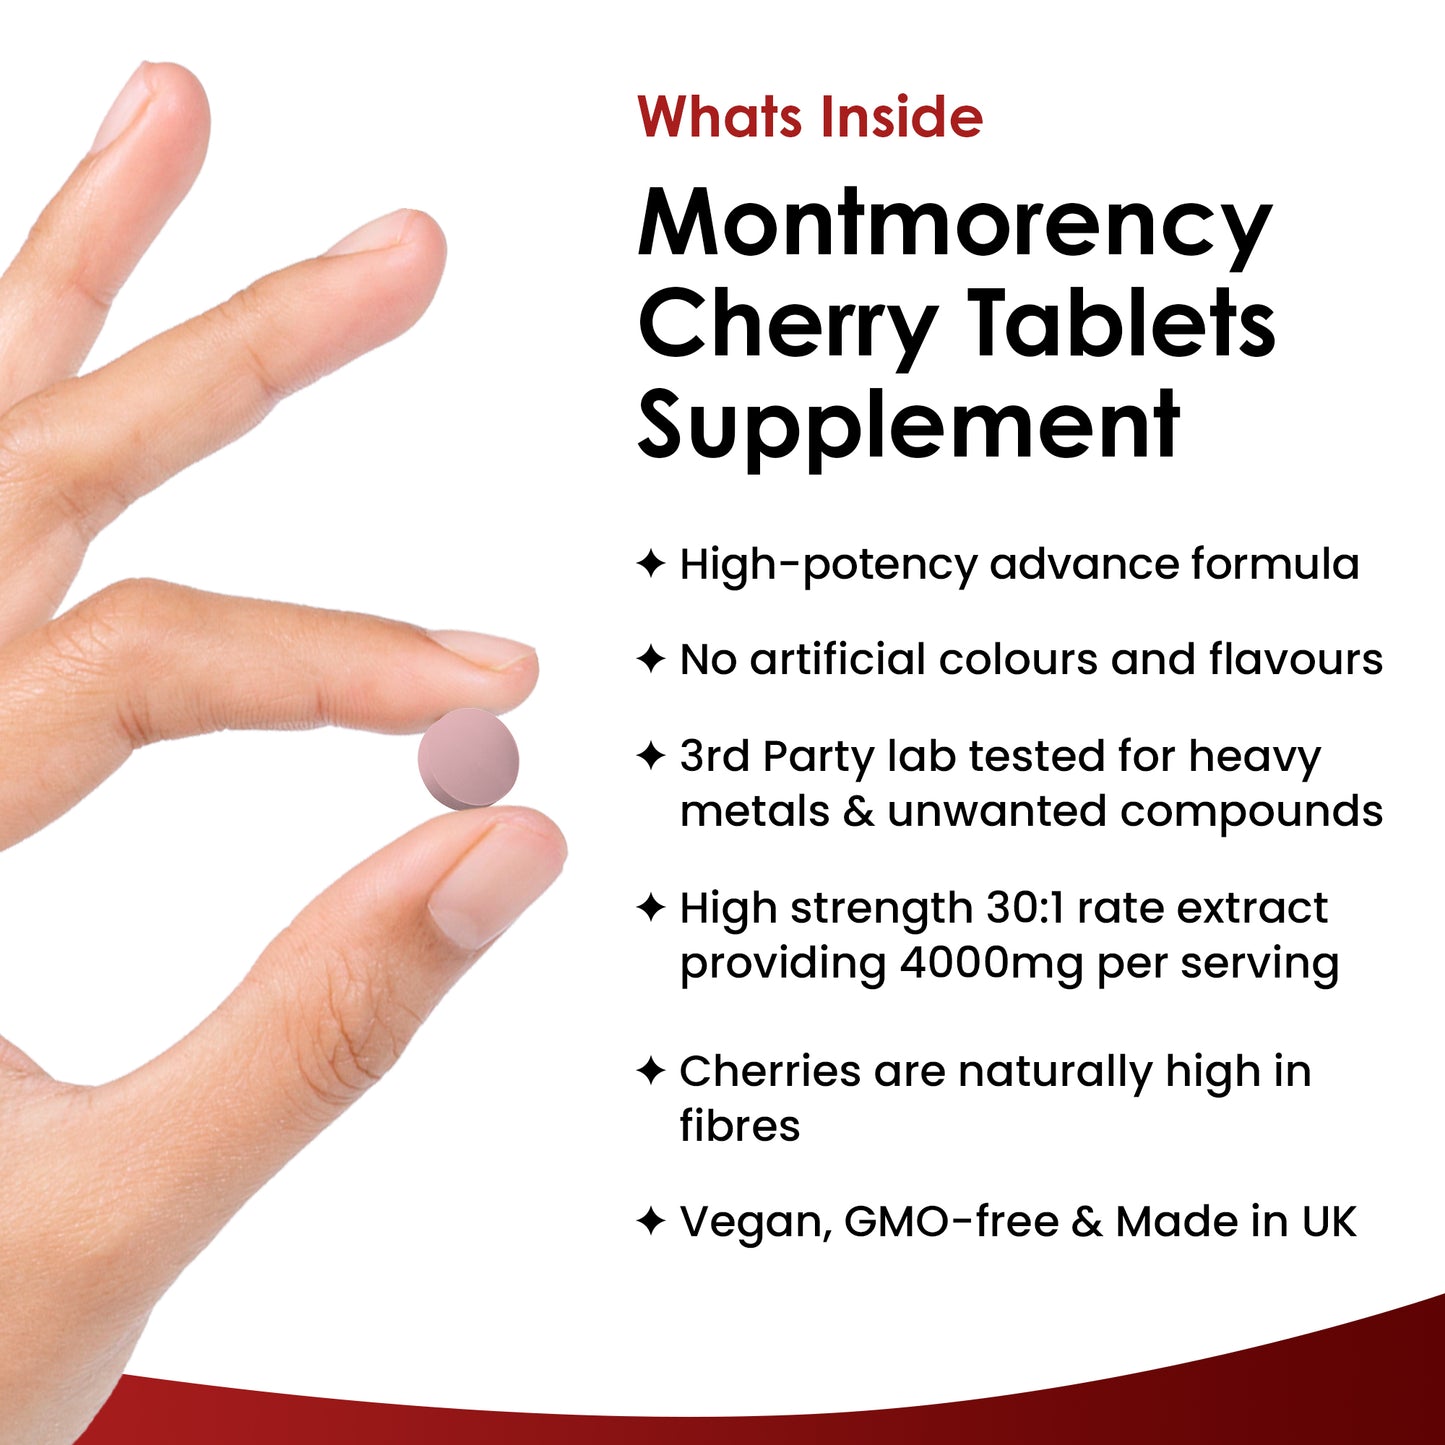 Montmorency Cherry 4000mg Extract - 180 Tablets High Strength Concentrate